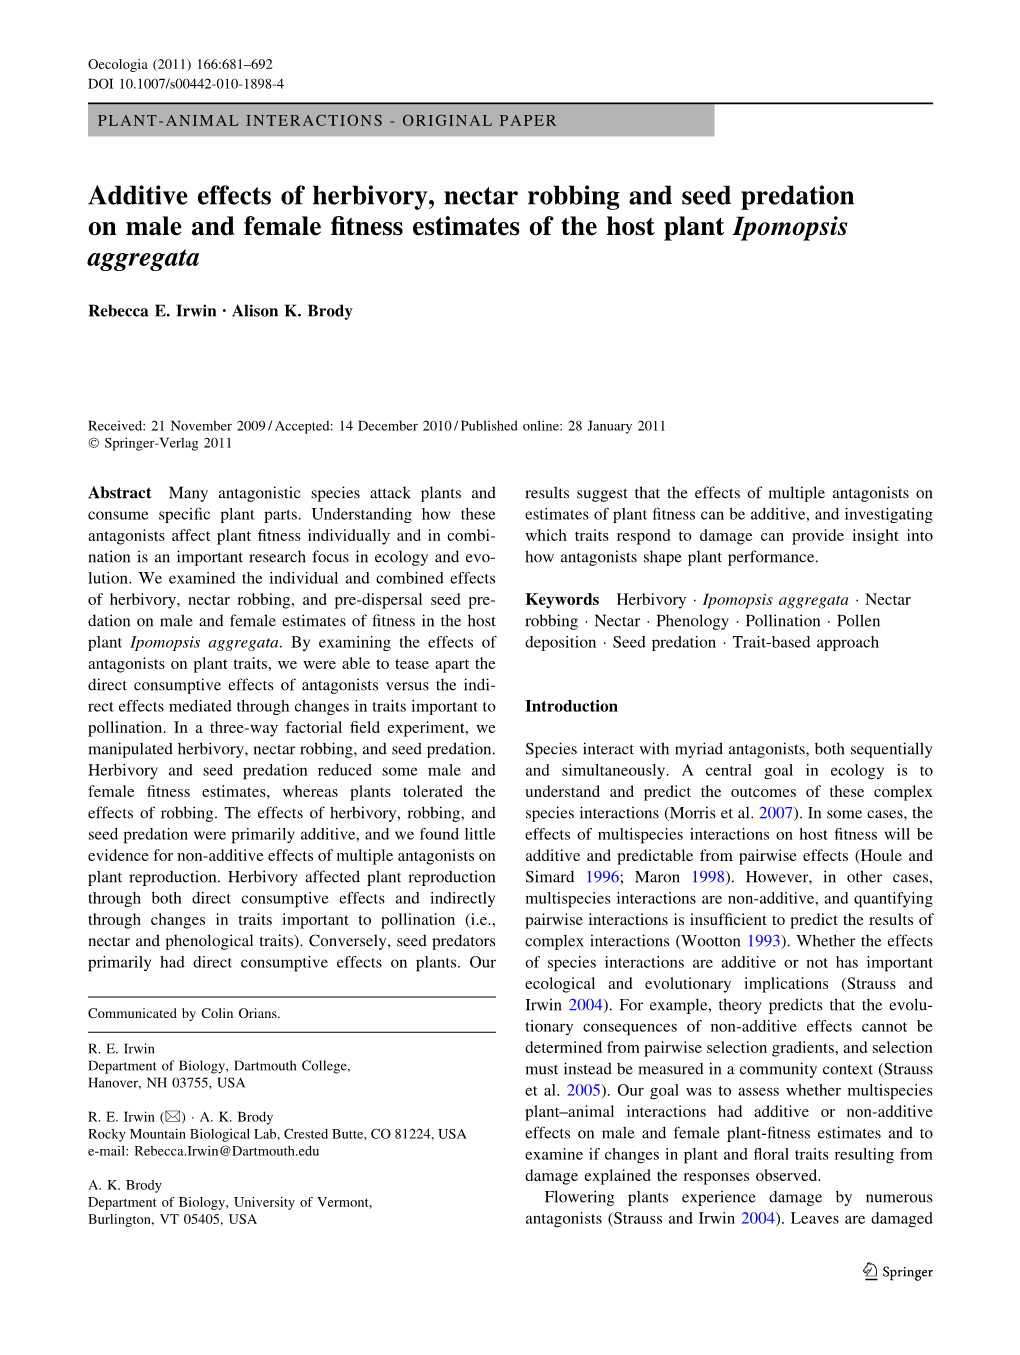 Additive Effects of Herbivory, Nectar Robbing and Seed Predation on Male and Female ﬁtness Estimates of the Host Plant Ipomopsis Aggregata